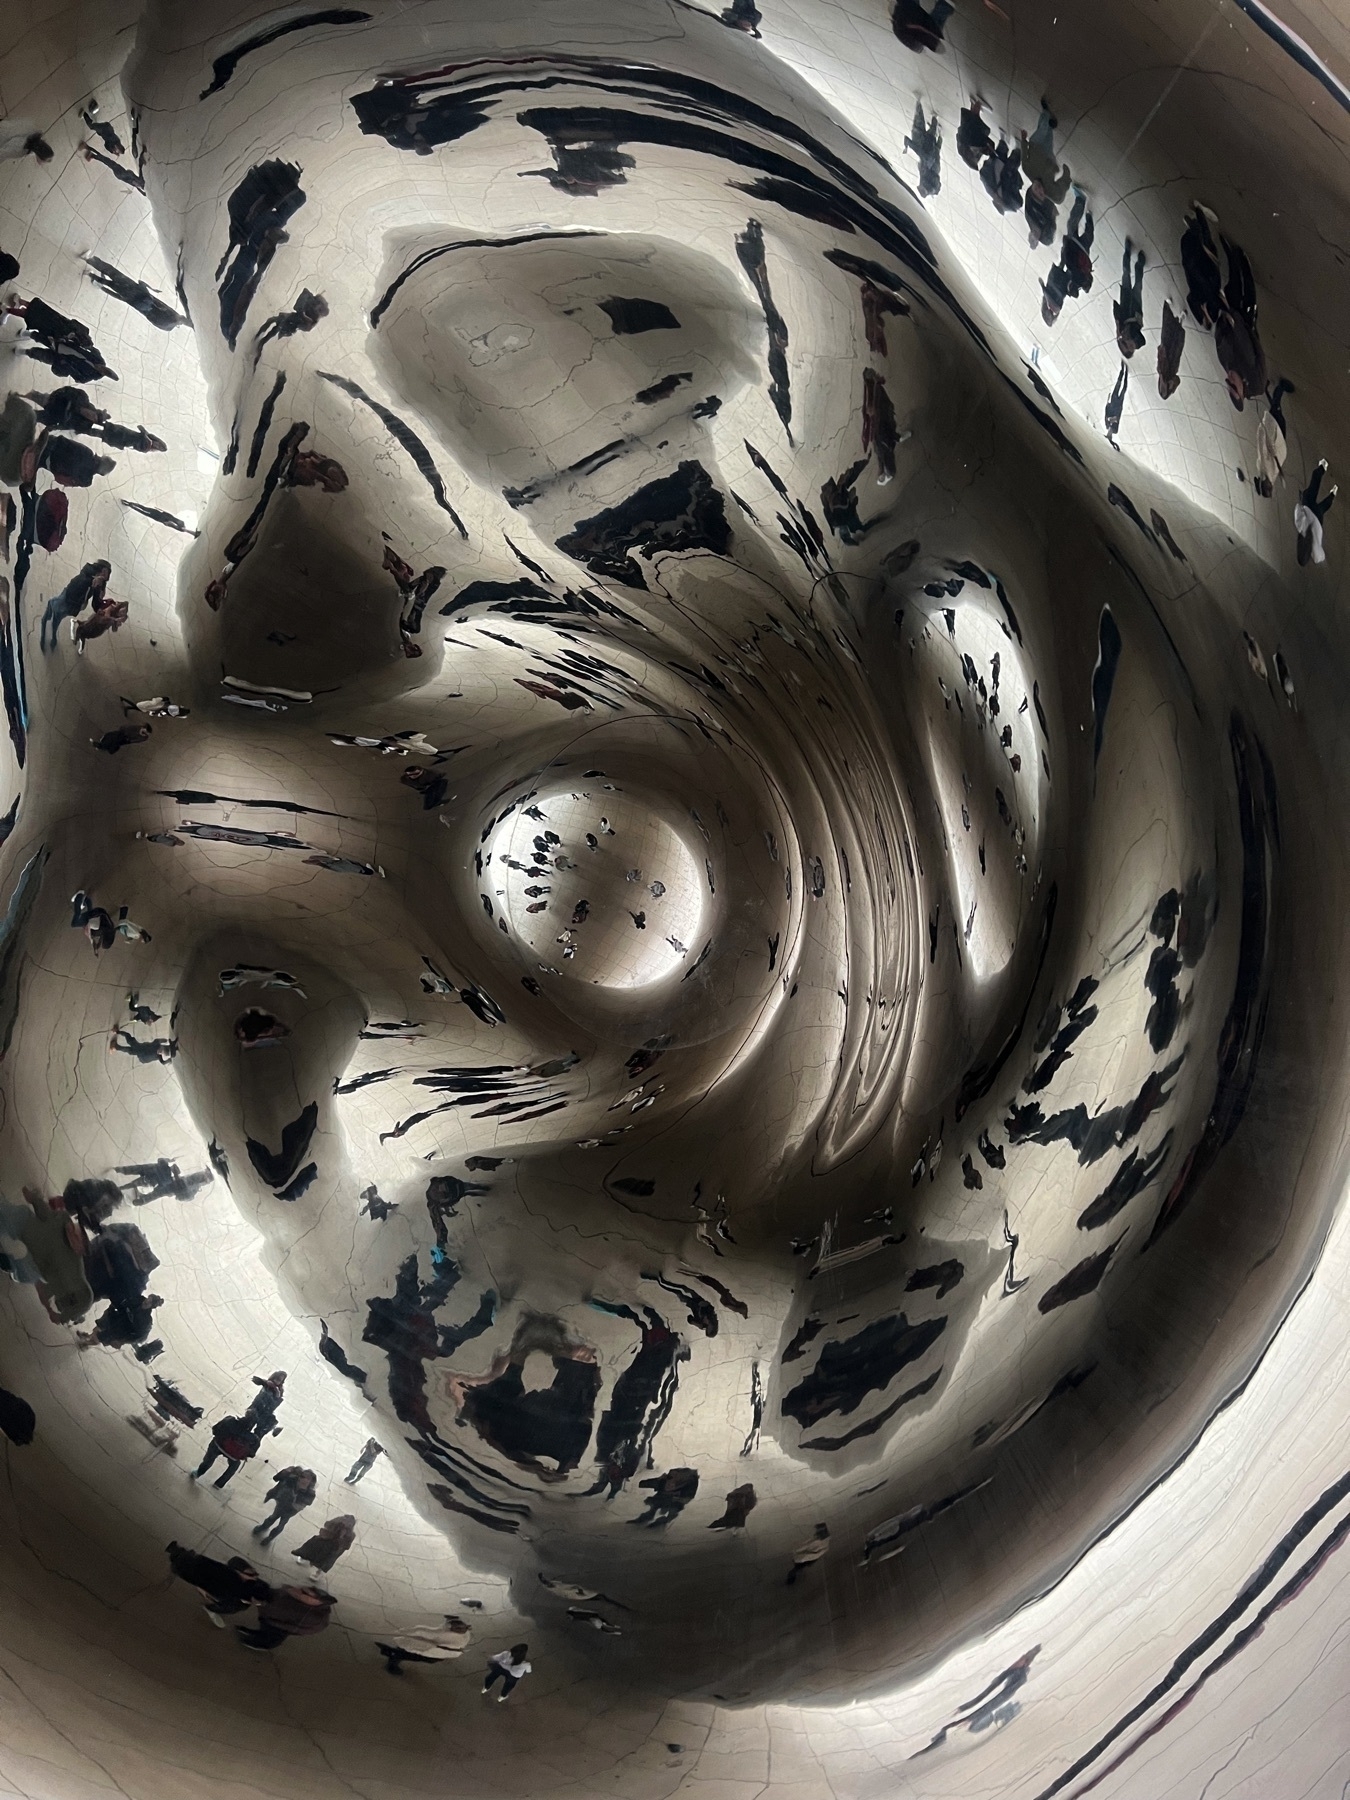 reflective picture from underneath the cloud gate bean in chicago